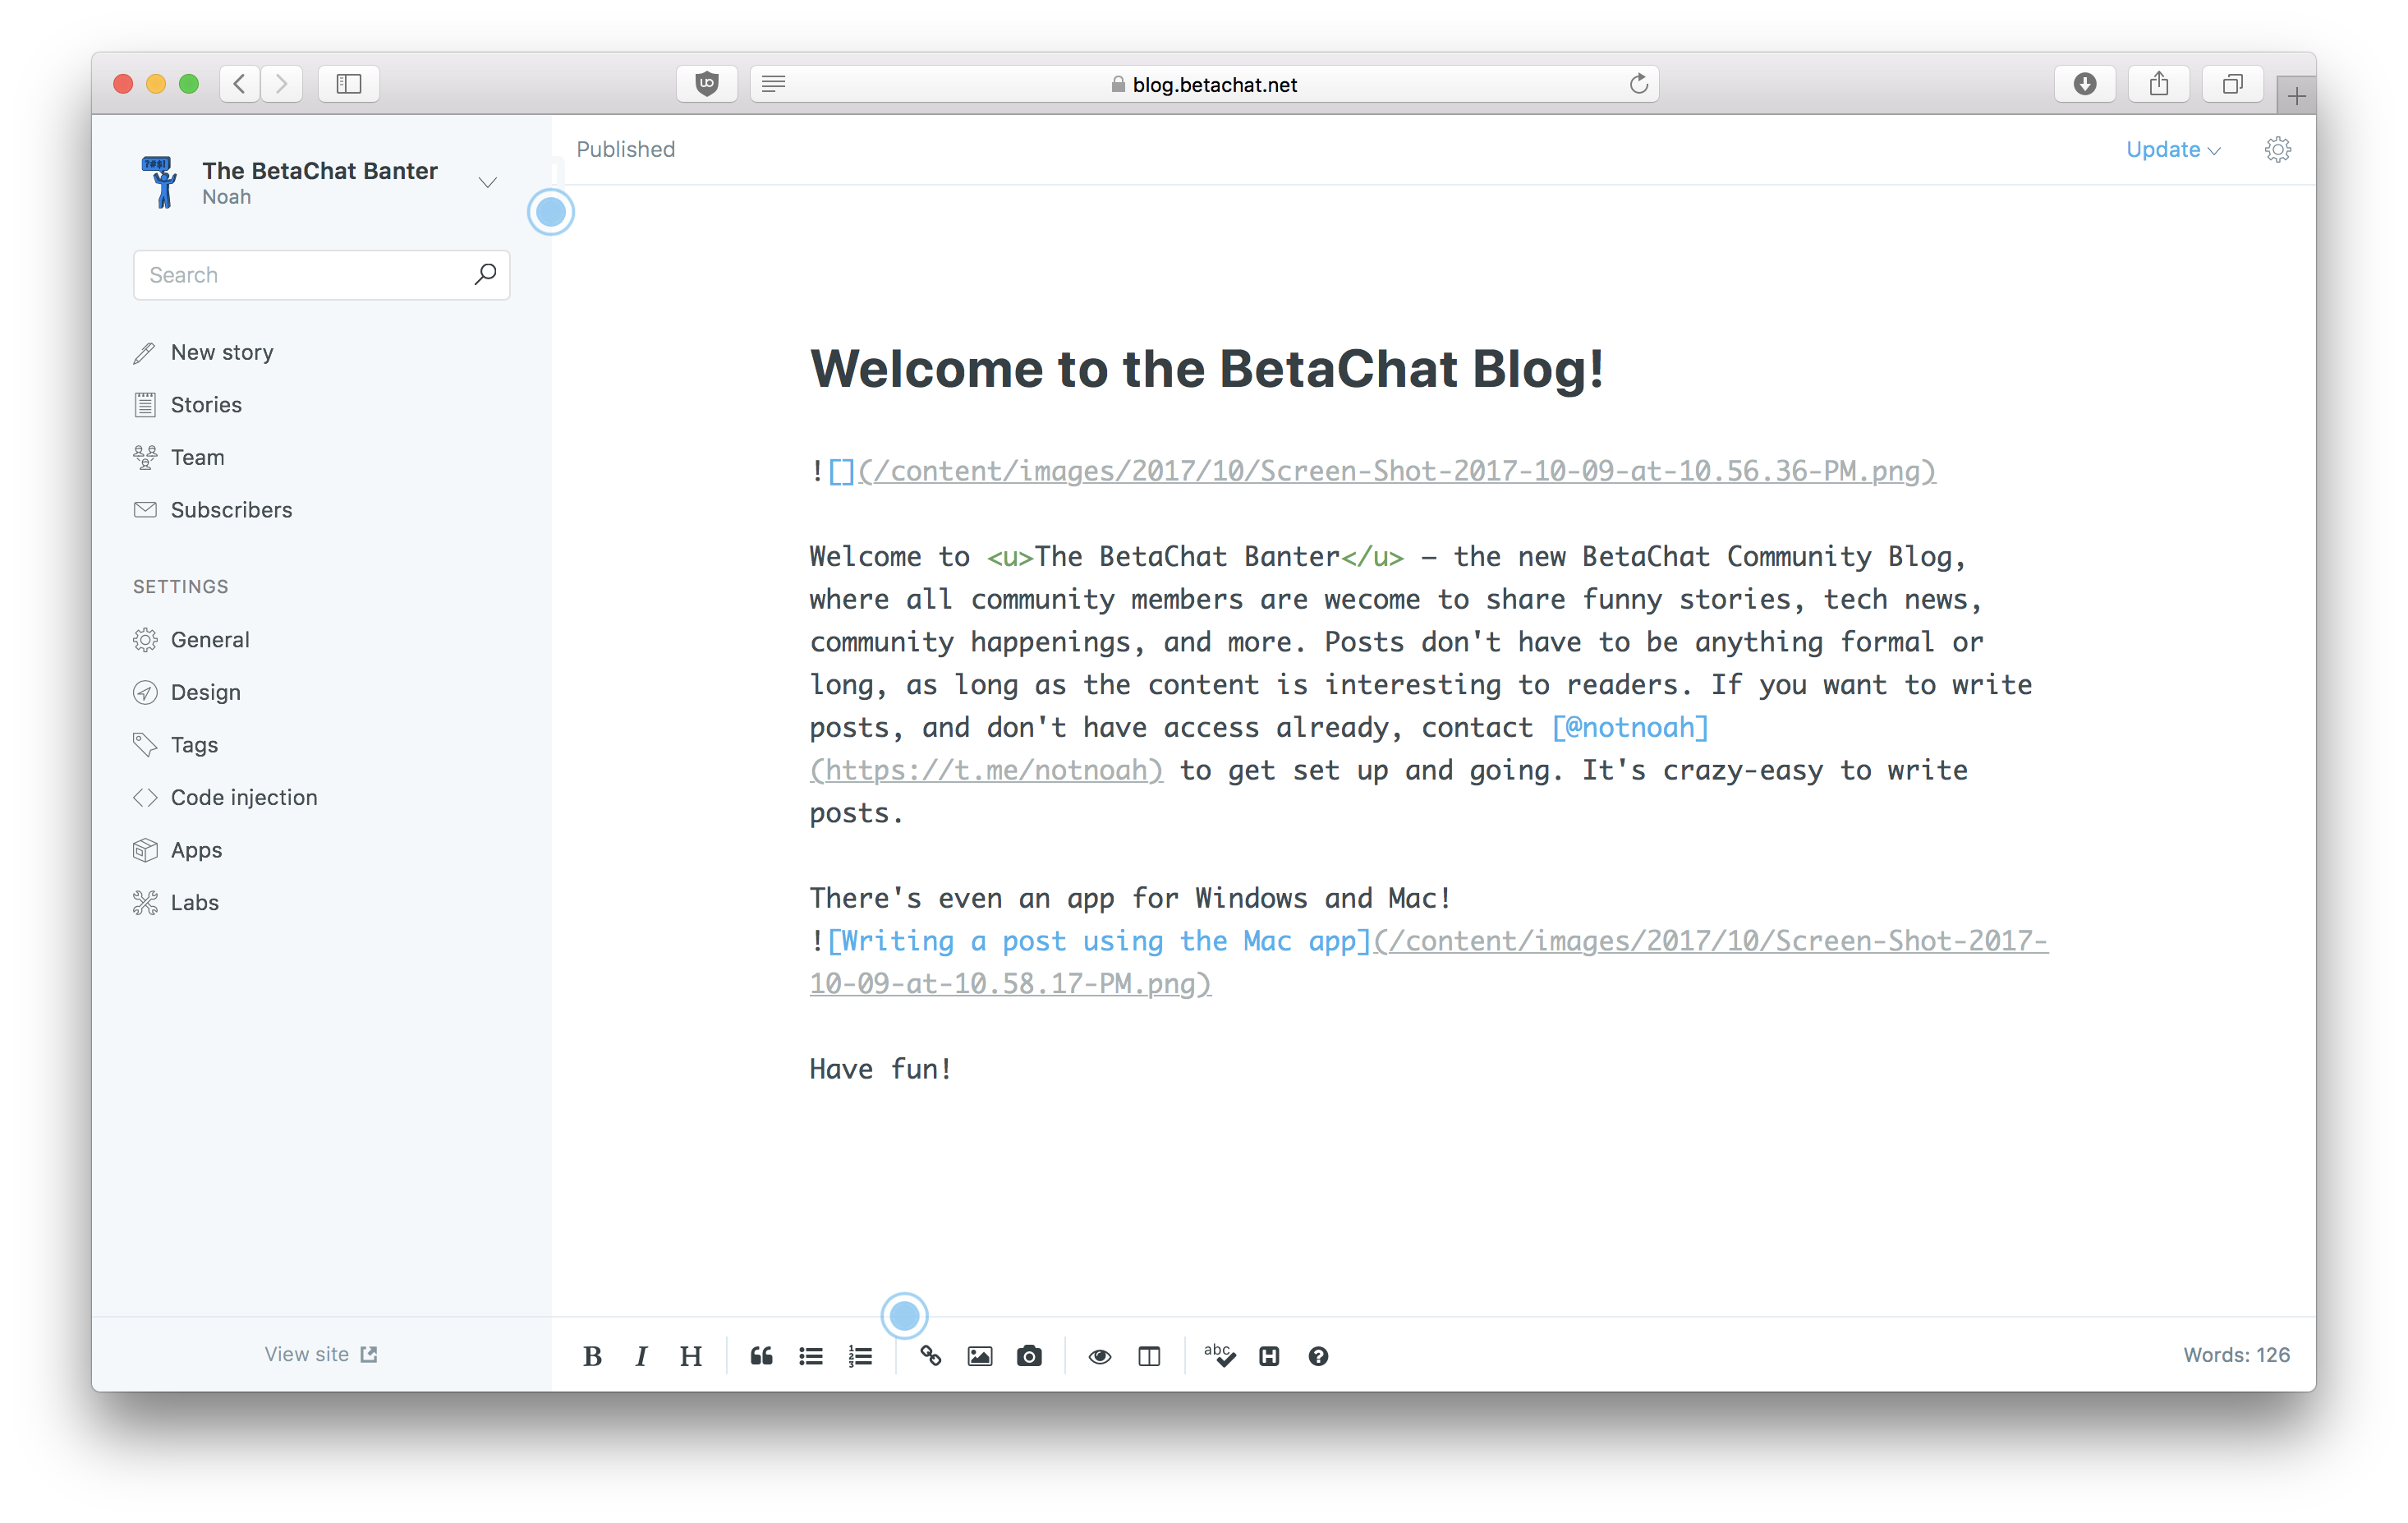 Welcome to the BetaChat Blog!